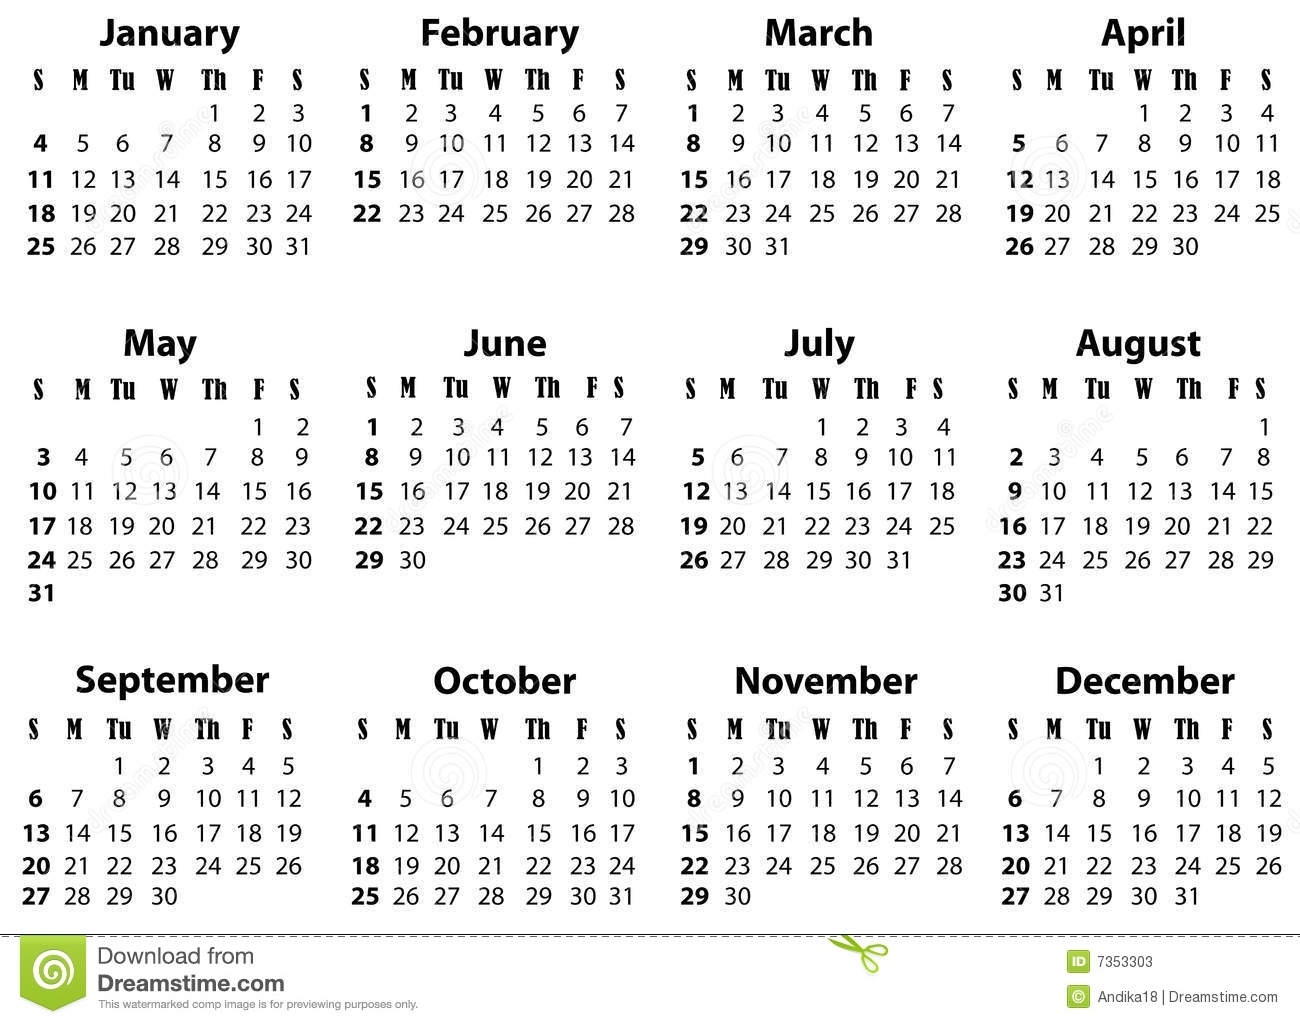 A Calendar For 2009 And 2020 Stock Image - Image Of April, Newyear 2020 Calendar Is Same As